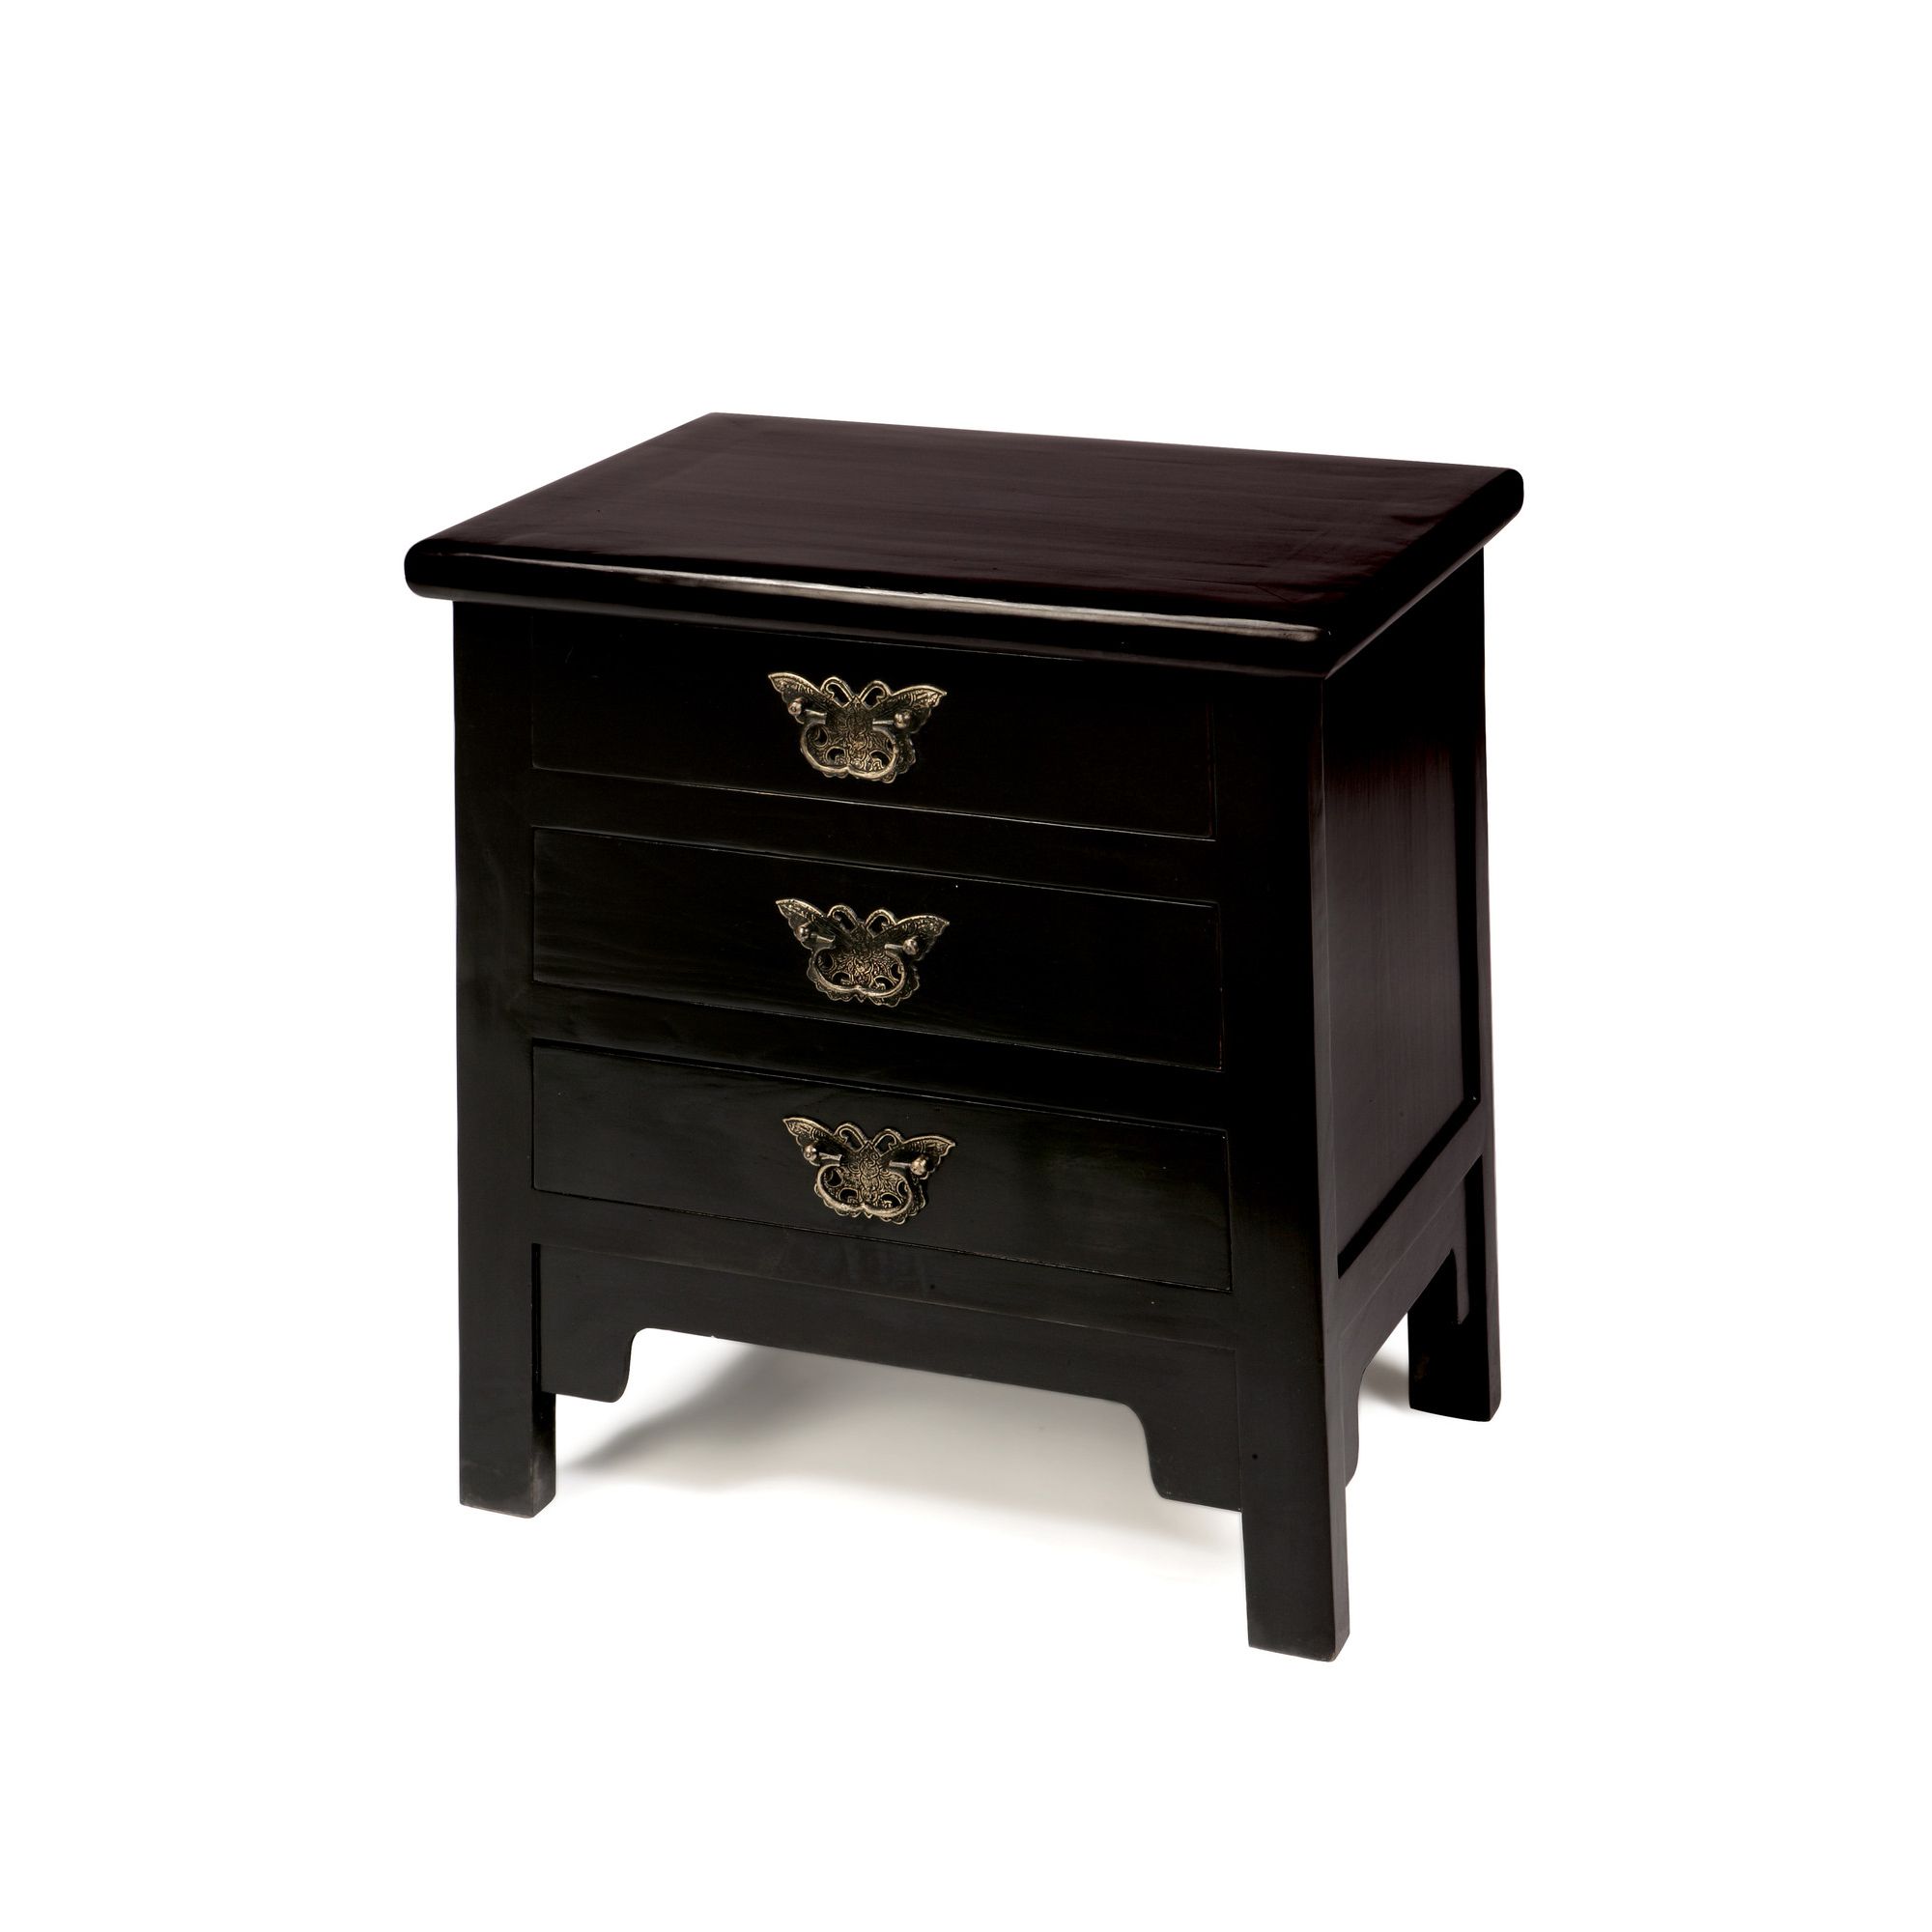 Shimu Chinese Classical Butterfly Drawers - Black Lacquer at Tescos Direct